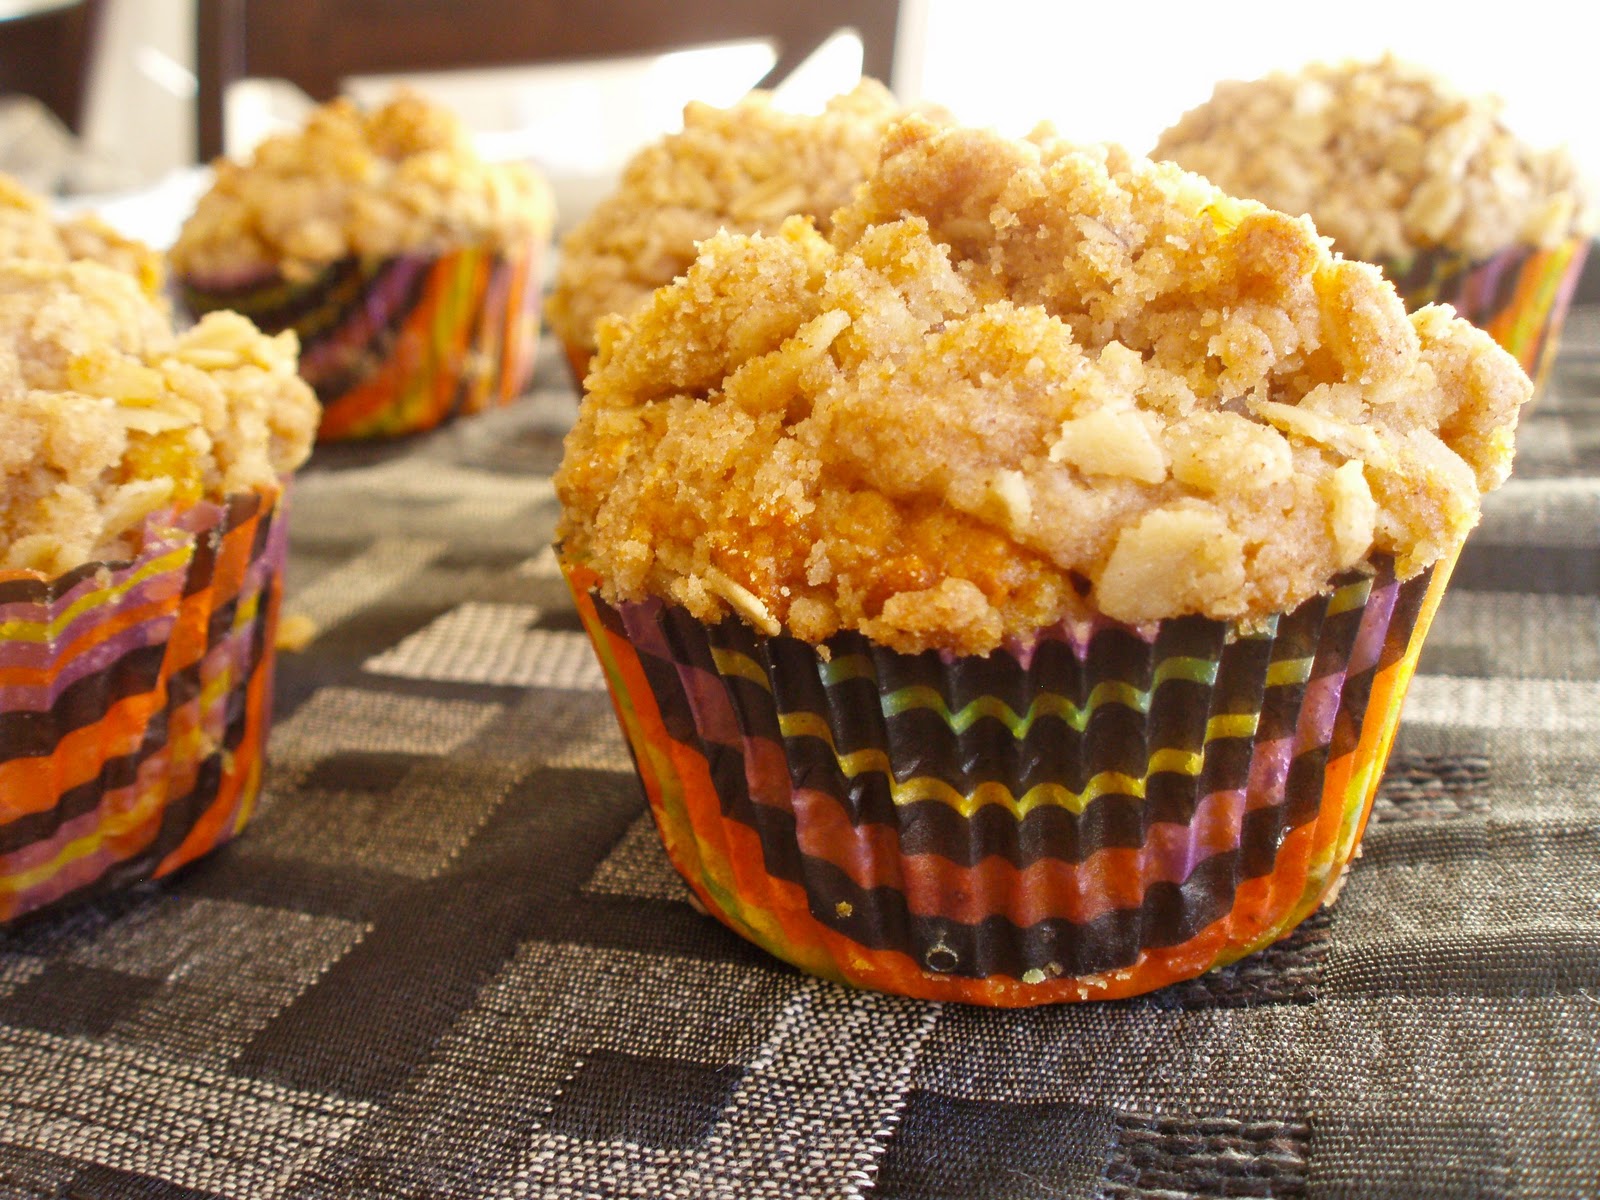 Naked Cupcakes: Pumpkin Oatmeal Muffins with Streusel Topping.